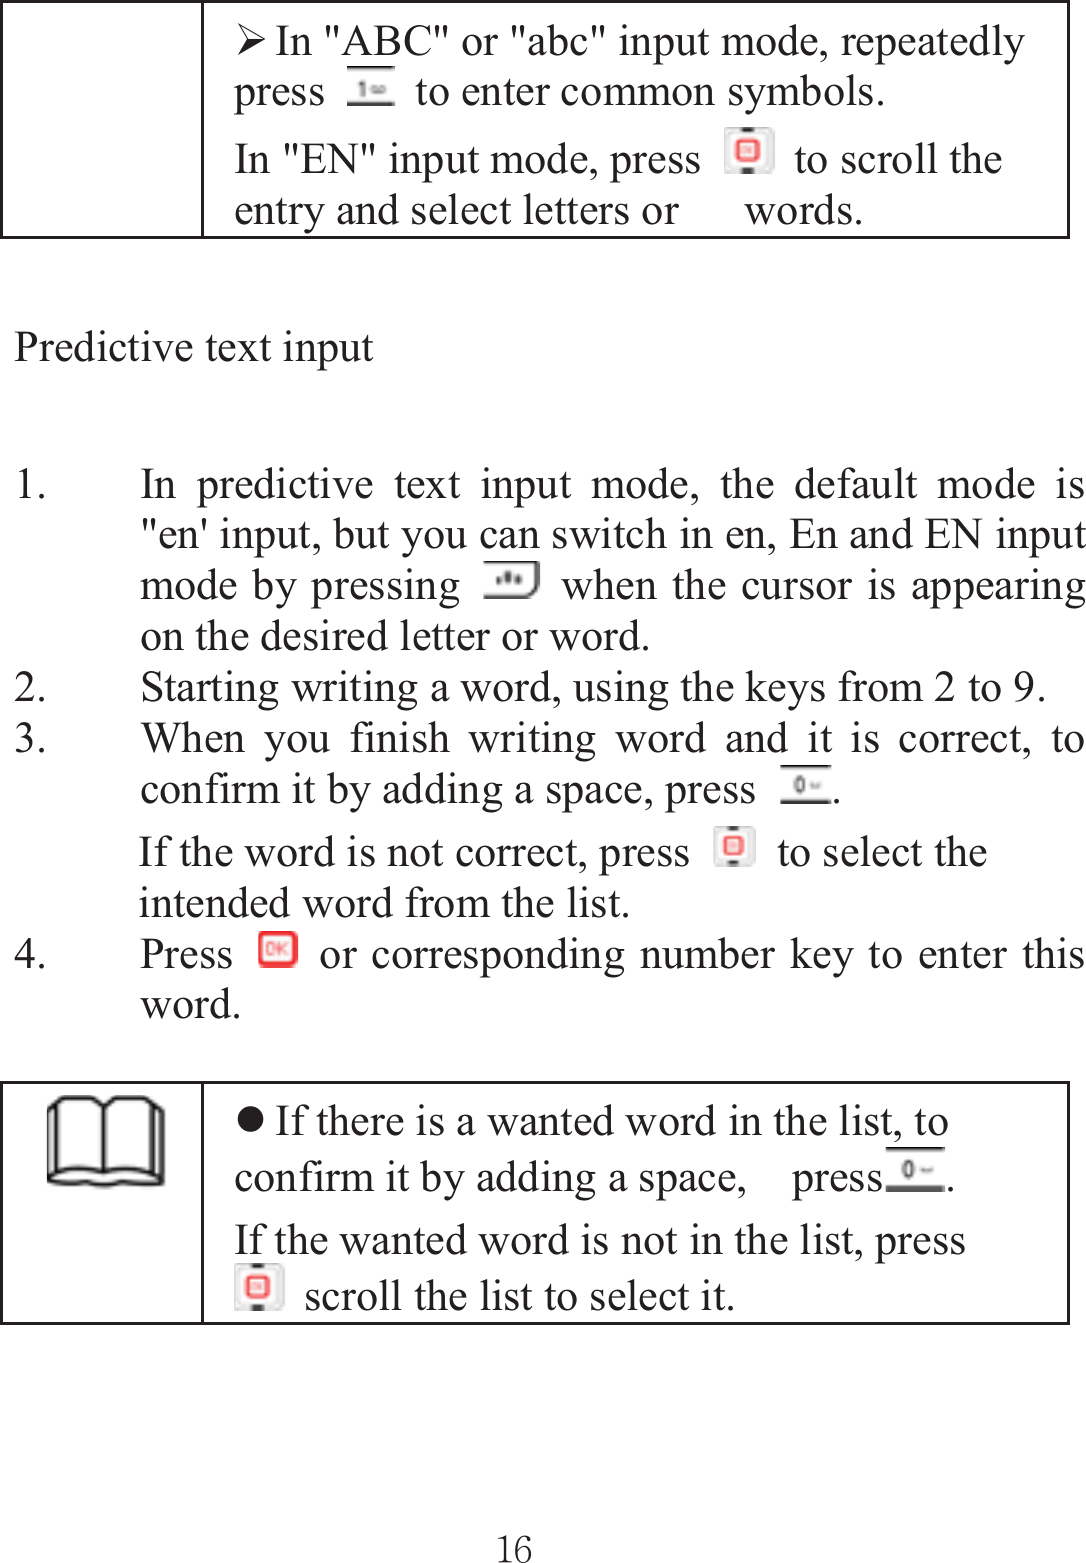 ¾In &quot;ABC&quot; or &quot;abc&quot; input mode, repeatedly press    to enter common symbols. In &quot;EN&quot; input mode, press    to scroll the entry and select letters or      words. Predictive text input   1. In predictive text input mode, the default mode is &quot;en&apos; input, but you can switch in en, En and EN input mode by pressing    when the cursor is appearing on the desired letter or word. 2. Starting writing a word, using the keys from 2 to 9.   3. When you finish writing word and it is correct, to confirm it by adding a space, press  .If the word is not correct, press    to select the intended word from the list. 4. Press    or corresponding number key to enter this word. zIf there is a wanted word in the list, to confirm it by adding a space,    press .If the wanted word is not in the list, press   scroll the list to select it. ٻٻڌڑٻٻ